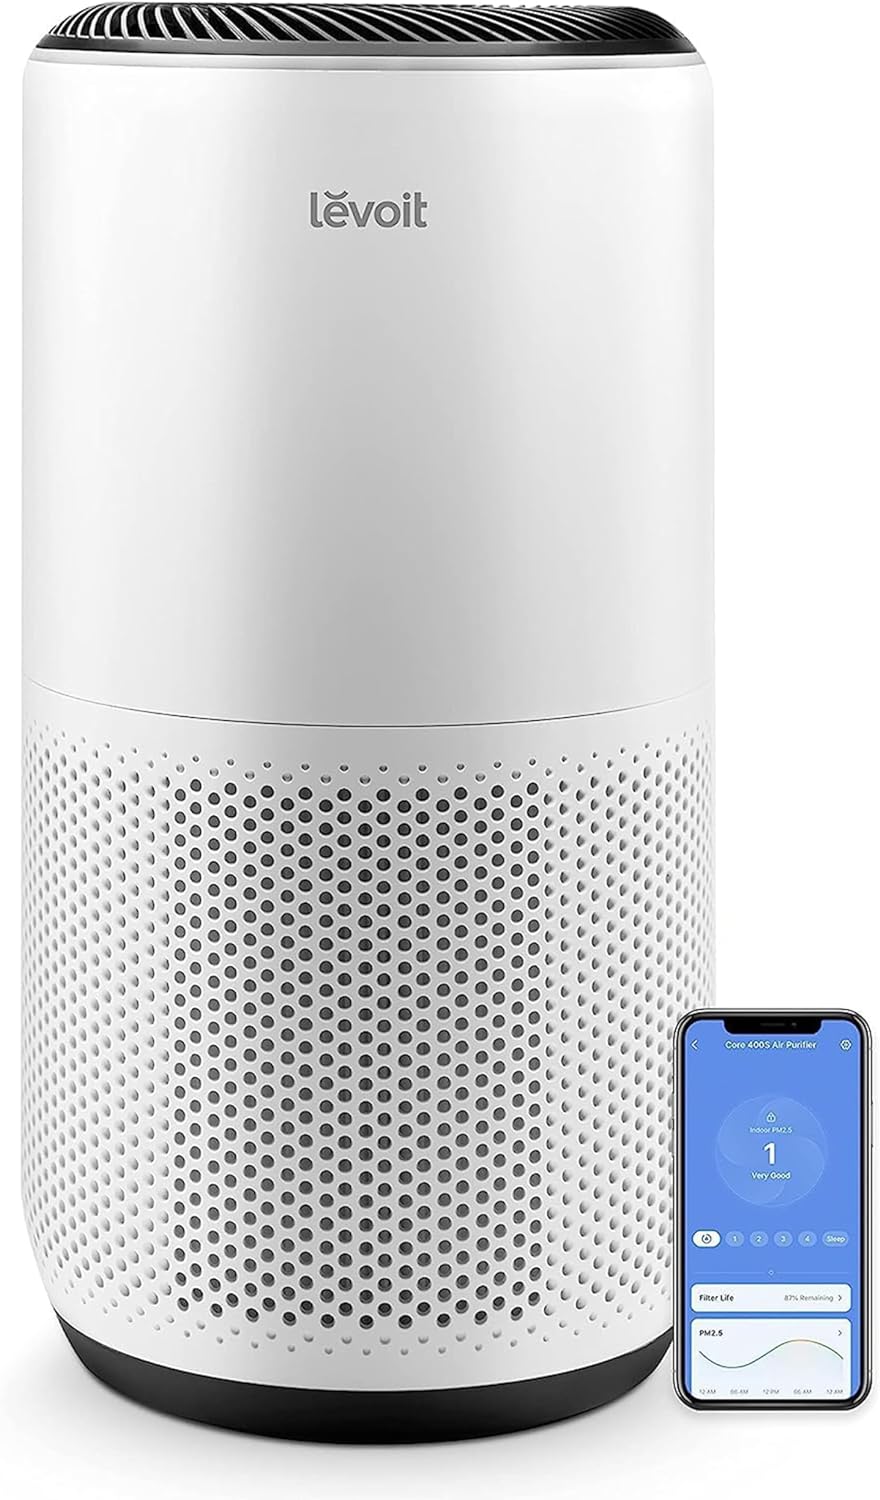 LEVOIT Air Purifiers for Home Large Room Up to 1980 Ft in 1 Hr With Air Quality Monitor, Smart WiFi and Auto Mode, 3-in-1 Filter Captures Pet Allergies, Smoke, Dust, Core 400S/Core 400S-P, White